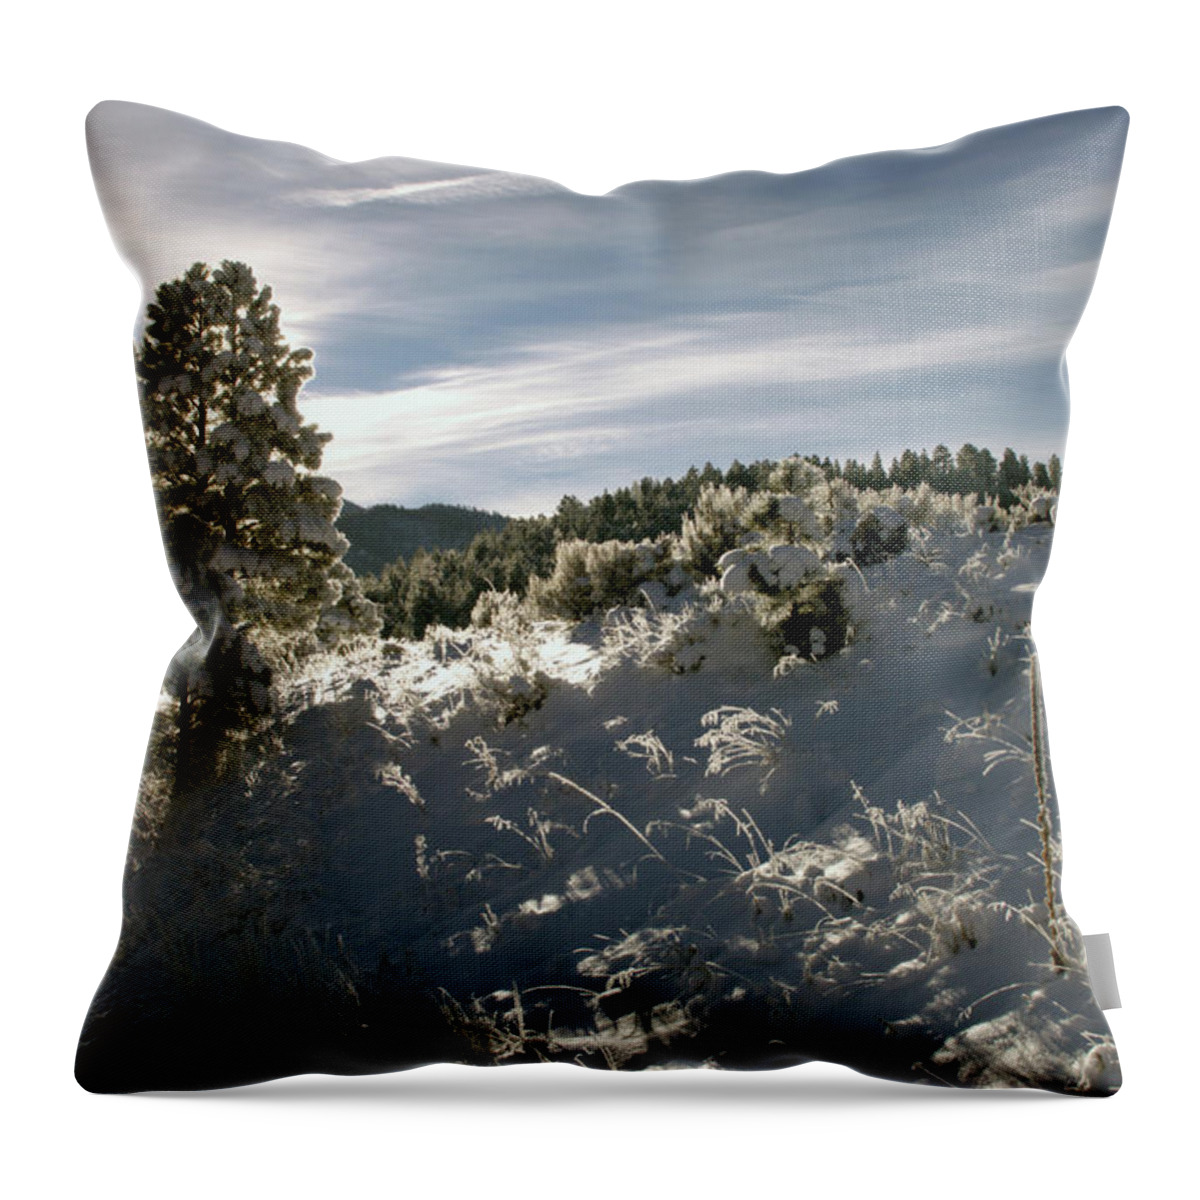 Eagle Nest Throw Pillow featuring the photograph Sunrise On Frosted Hill by Ron Weathers